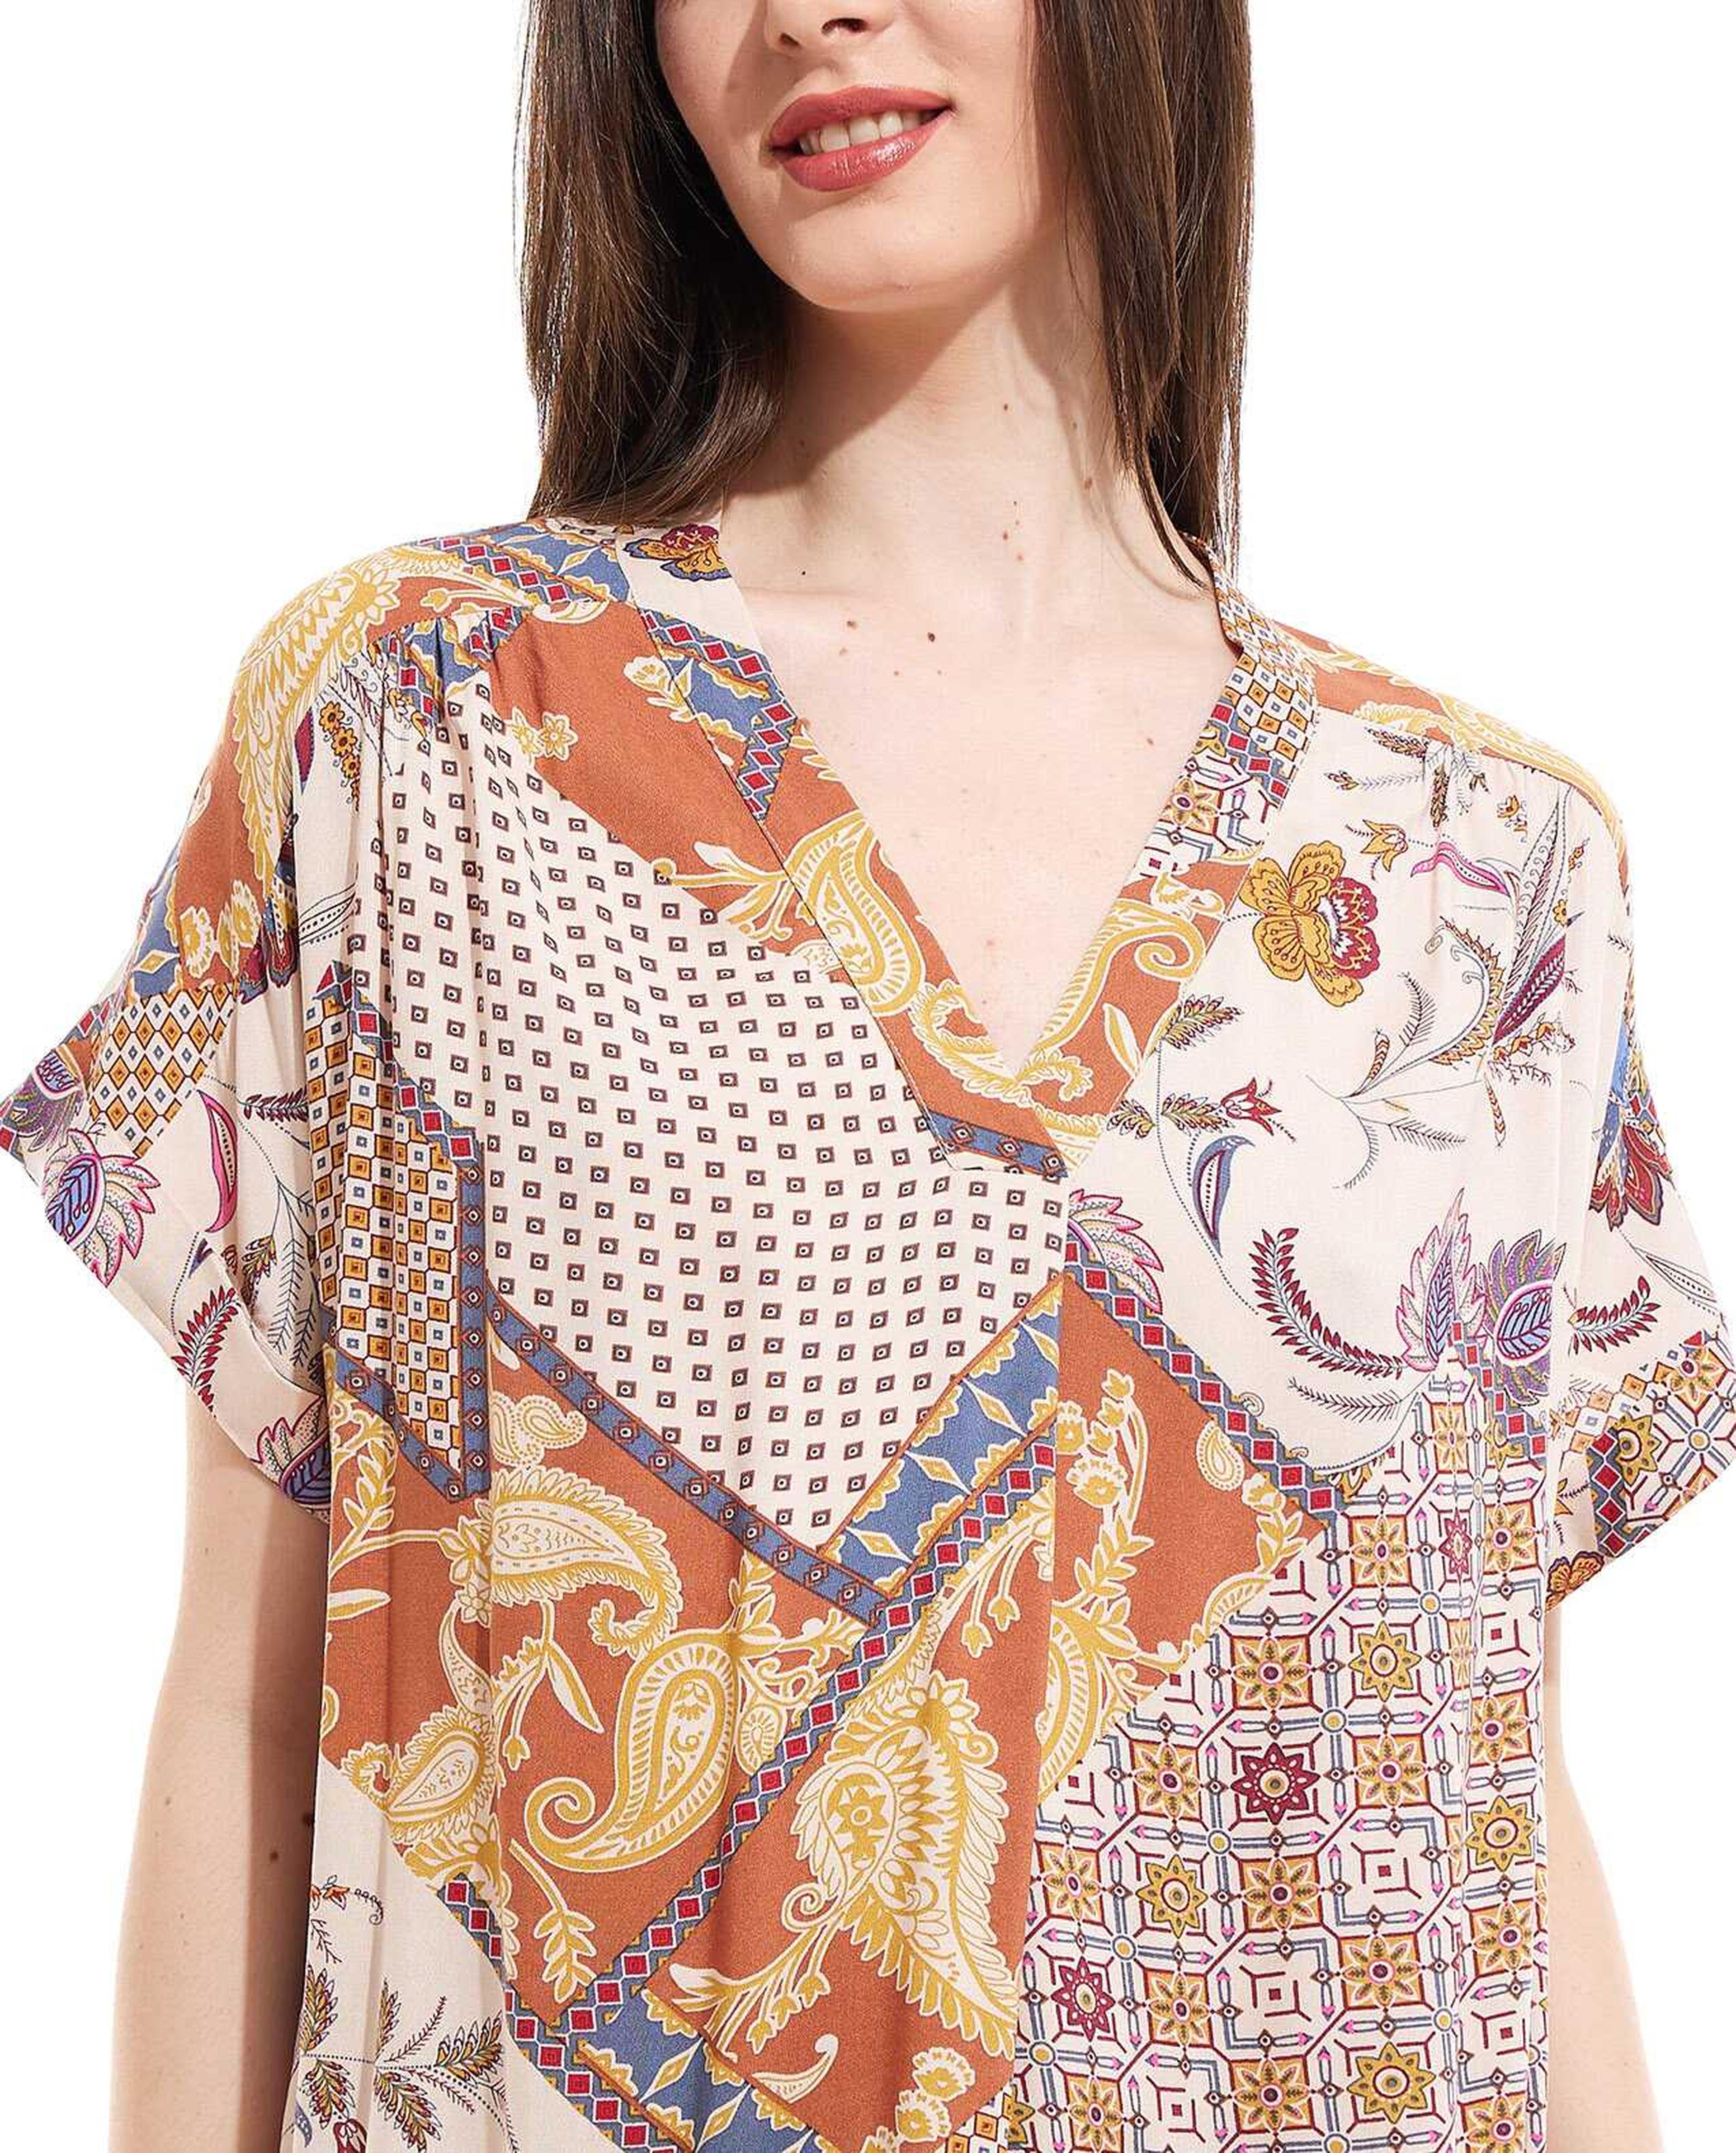 Patterned Nightgown with V-Neck and Short Sleeves